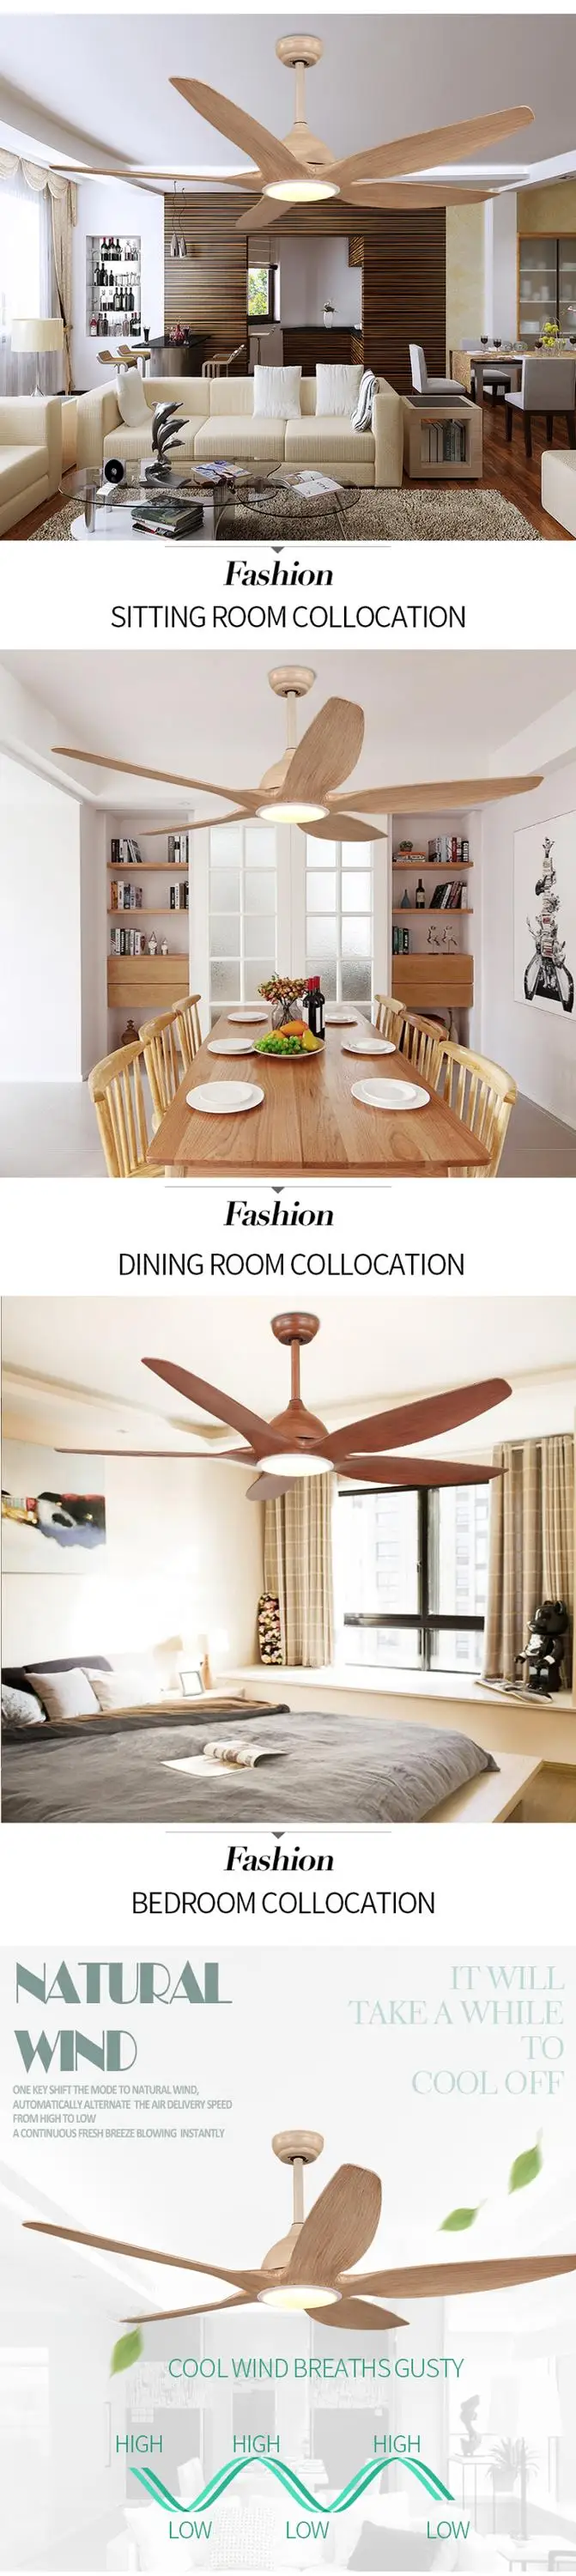 Modern design new arrival 62 / 52-F5051-WW decorative ceiling fan with light